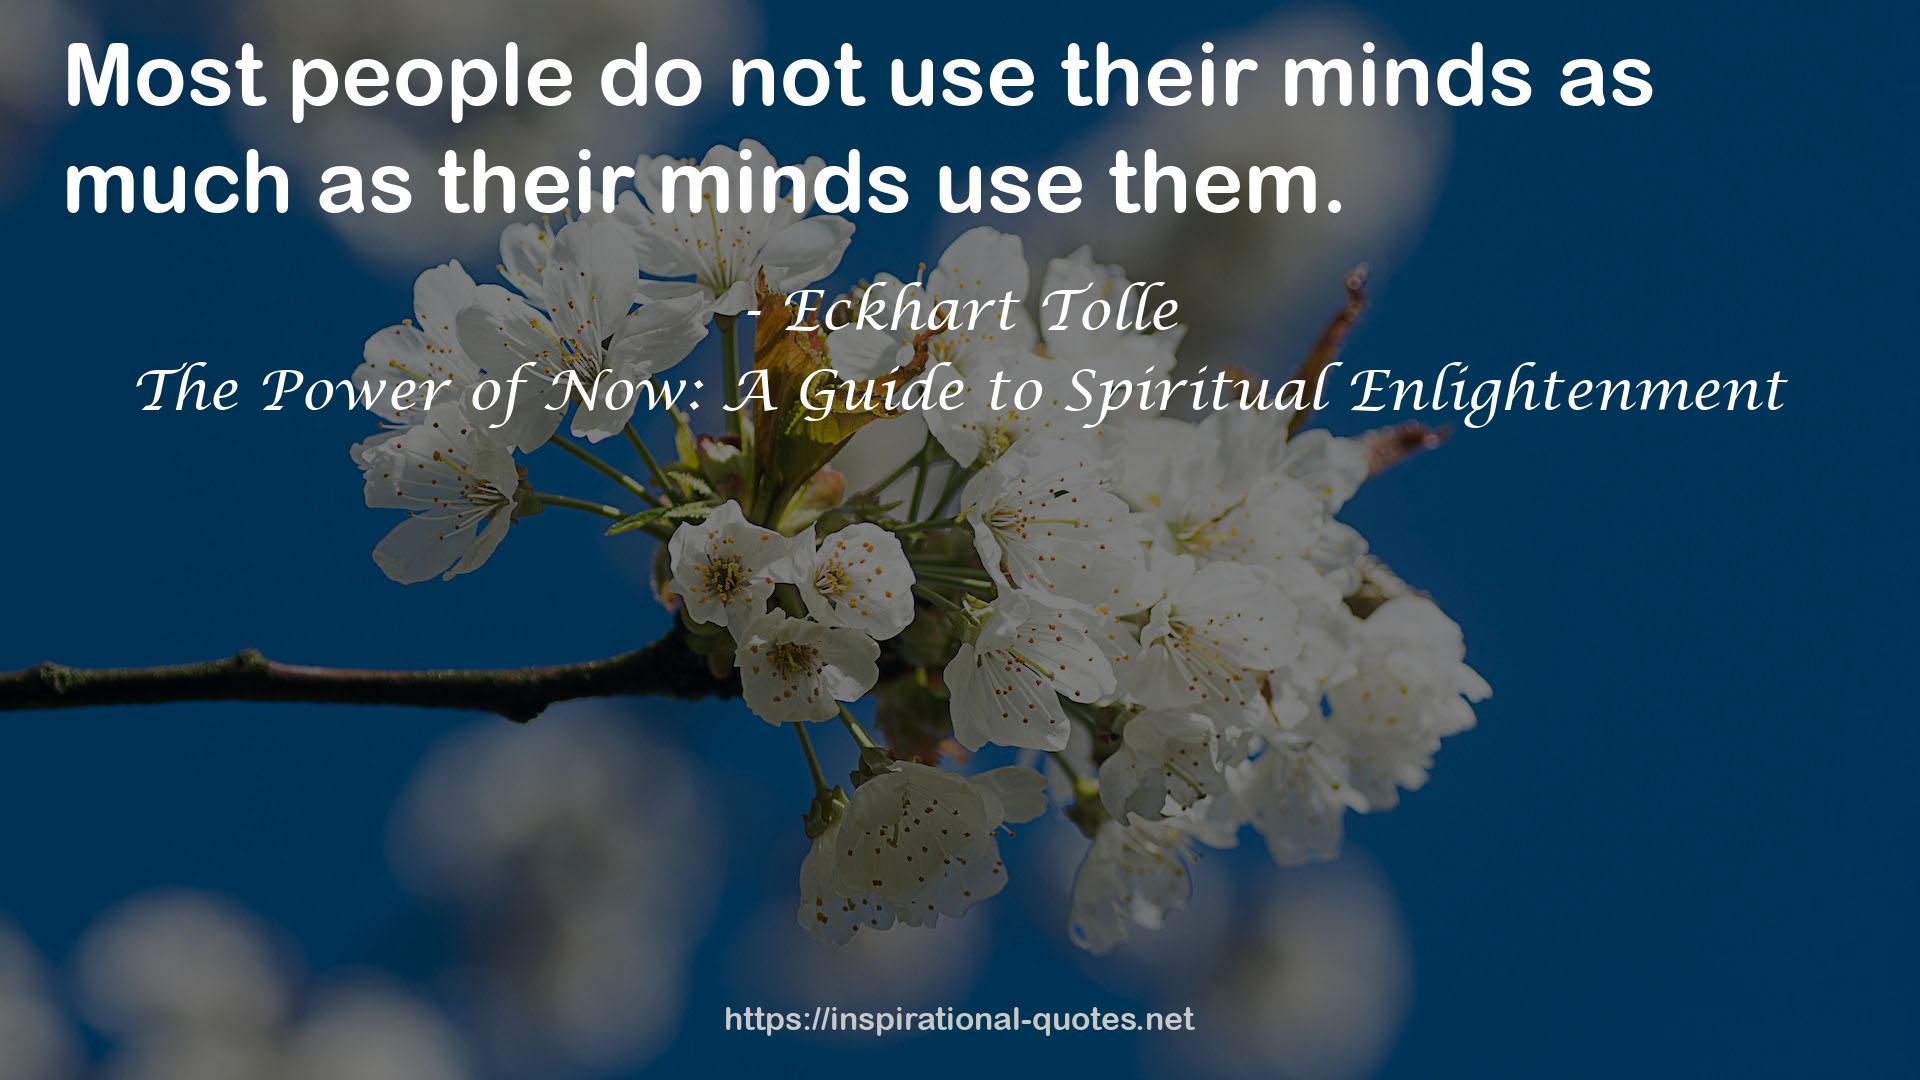 The Power of Now: A Guide to Spiritual Enlightenment QUOTES